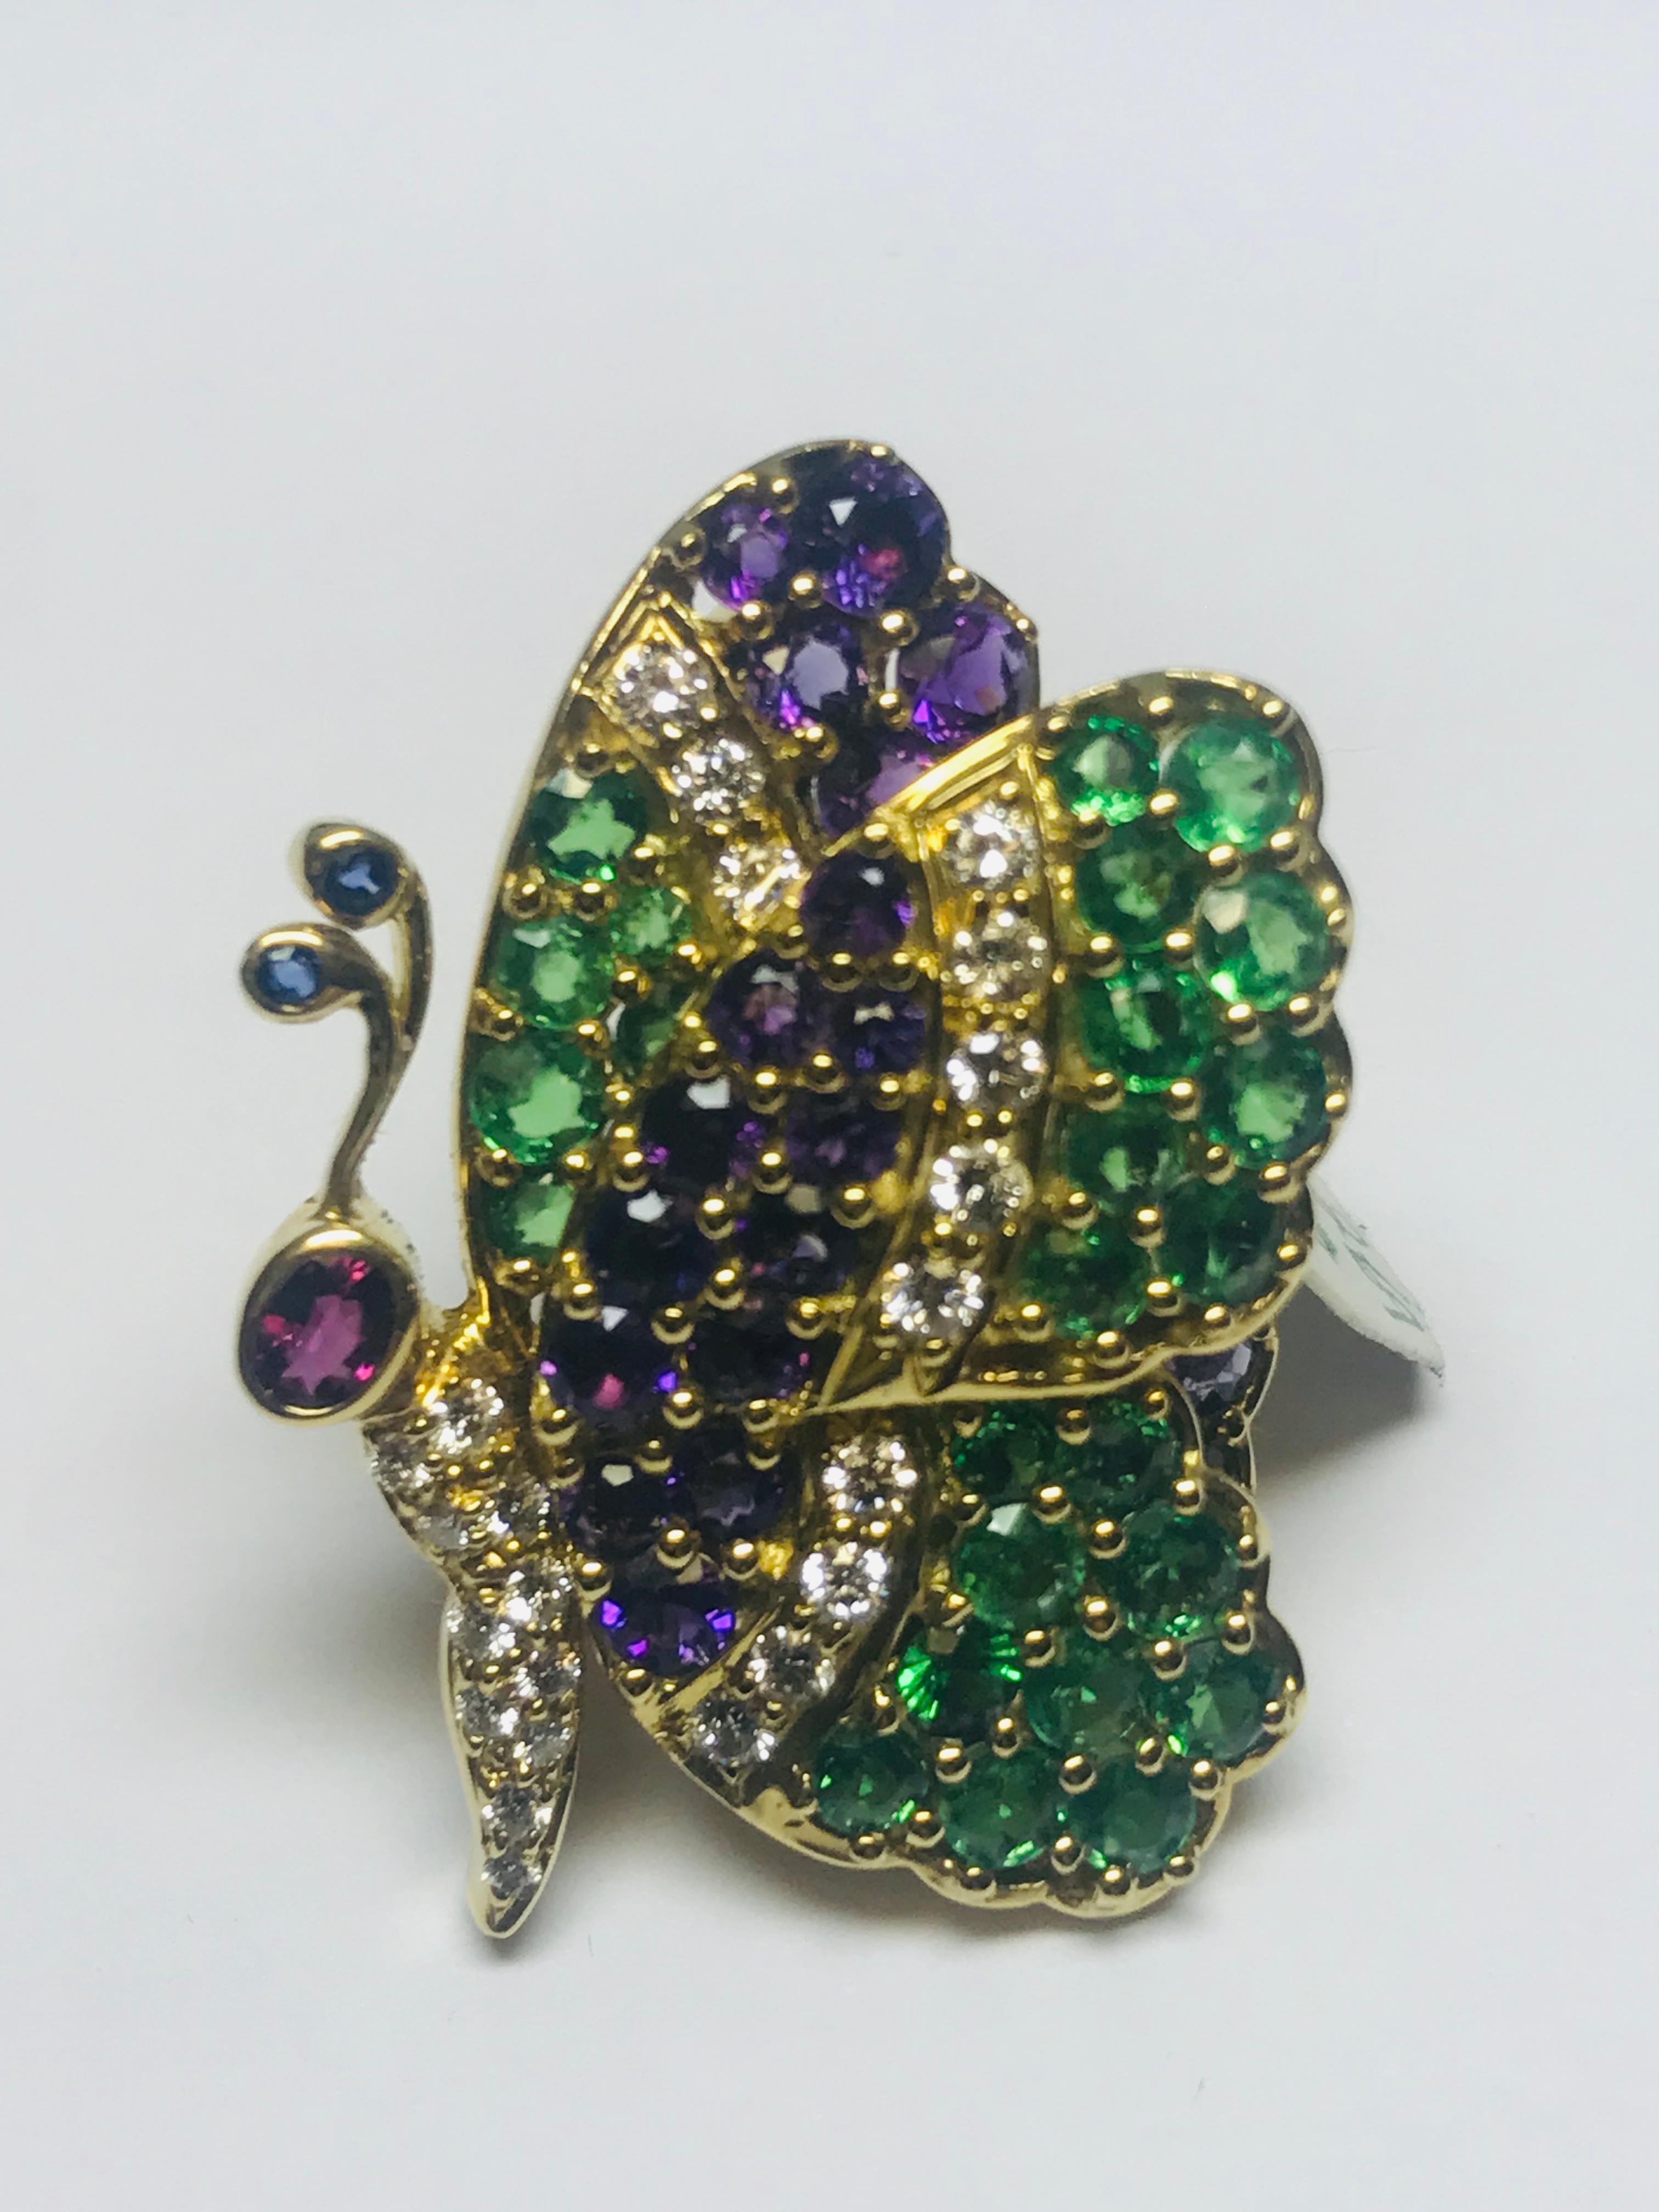 This uniquely designed profile butterfly brooch, designed and created by Jean Vitau, has such an amazing color combination. Combining 2.69 carats of Amethyst with 3.15 carats of Tsavorite is just beautiful!! Add to it .55 carats of diamond and a